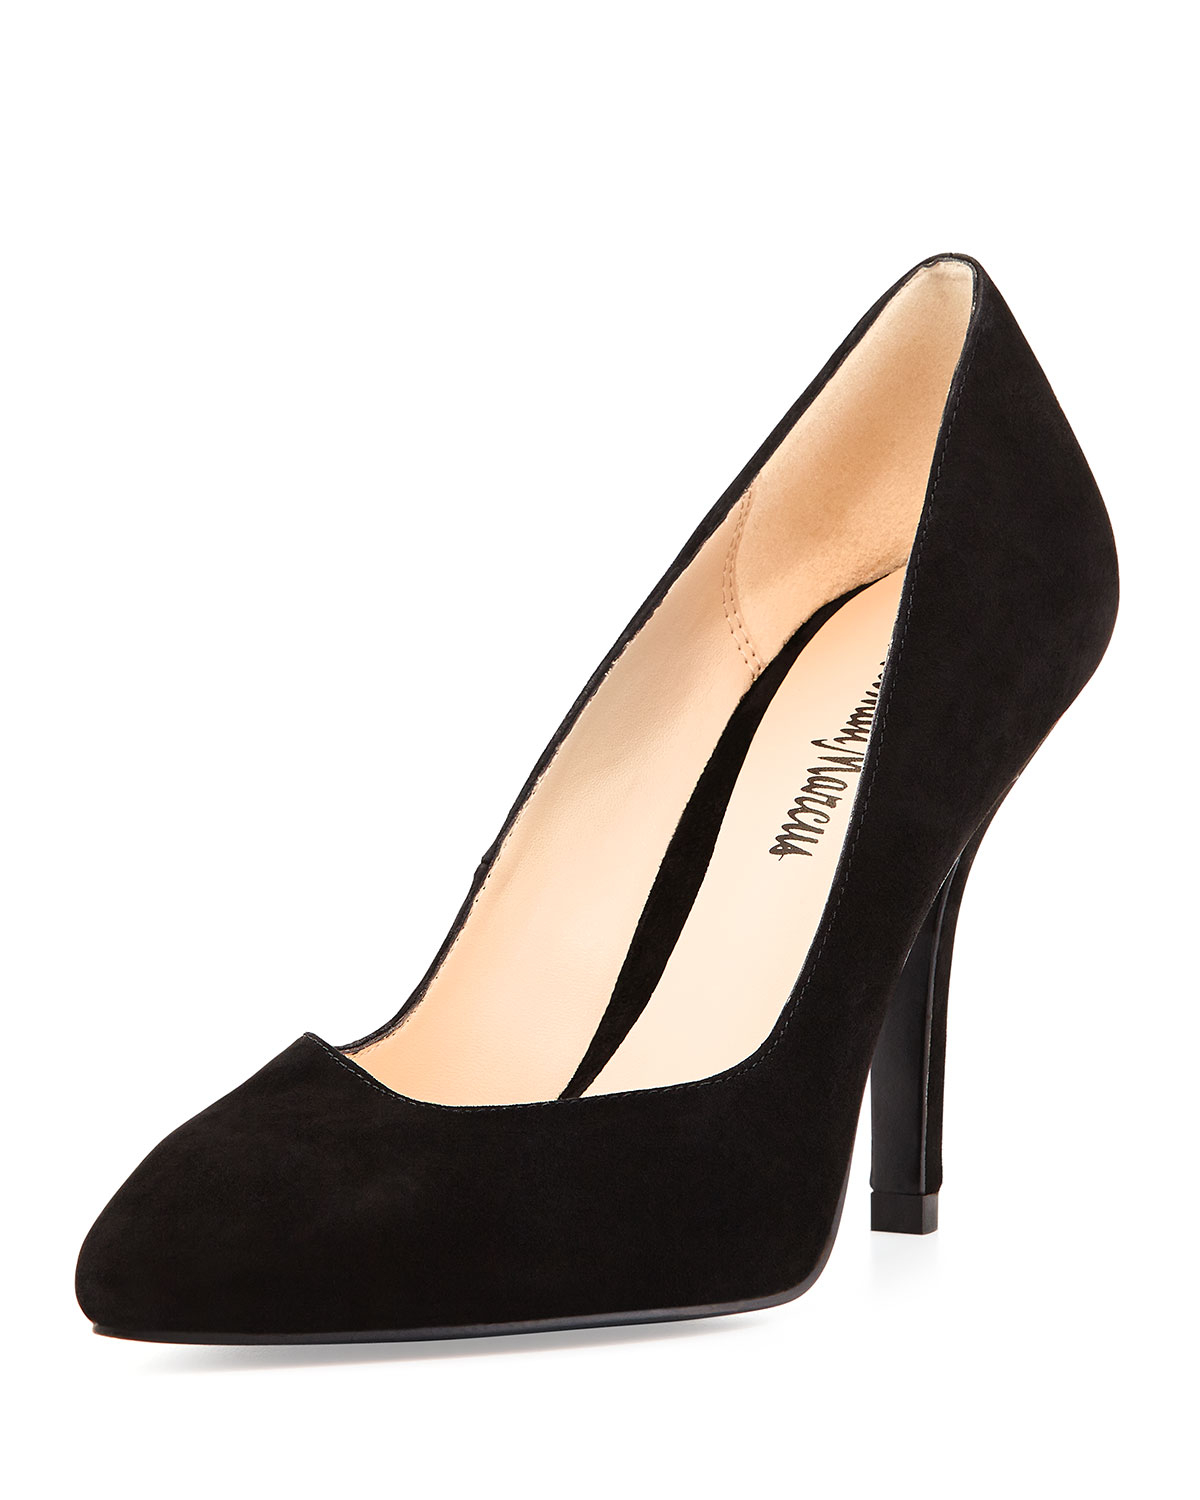 Neiman marcus Clearly Suede Leather High-Heel Pump in Black | Lyst